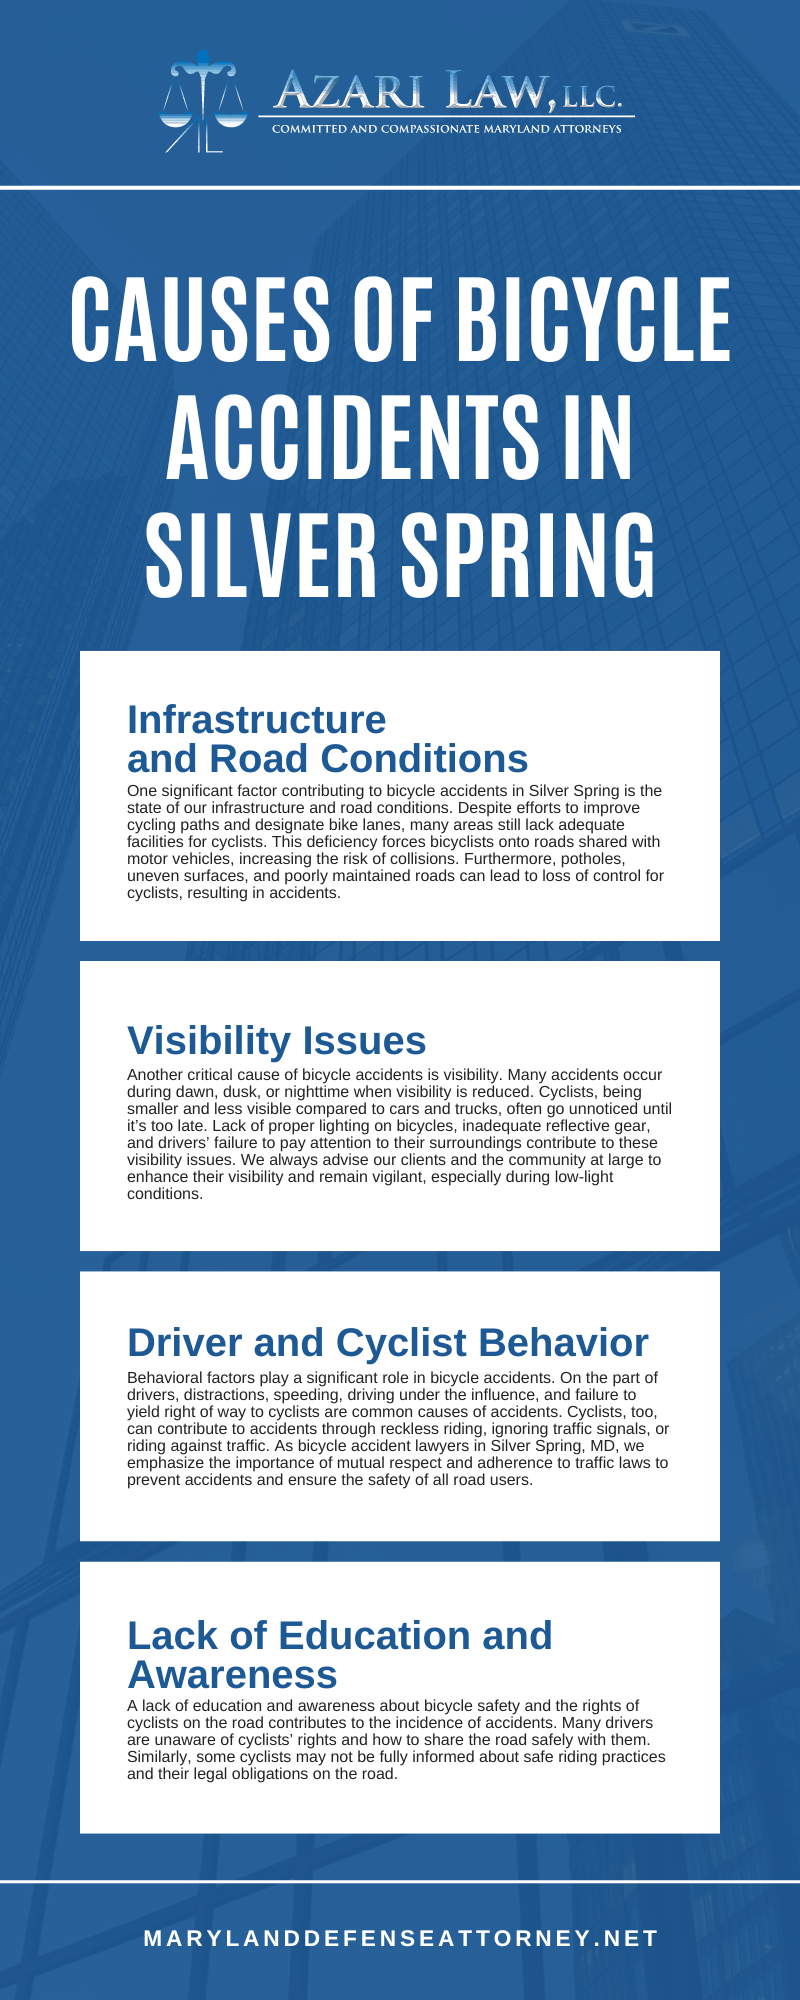 Causes Of Bicycle Accidents In Silver Spring Infographic